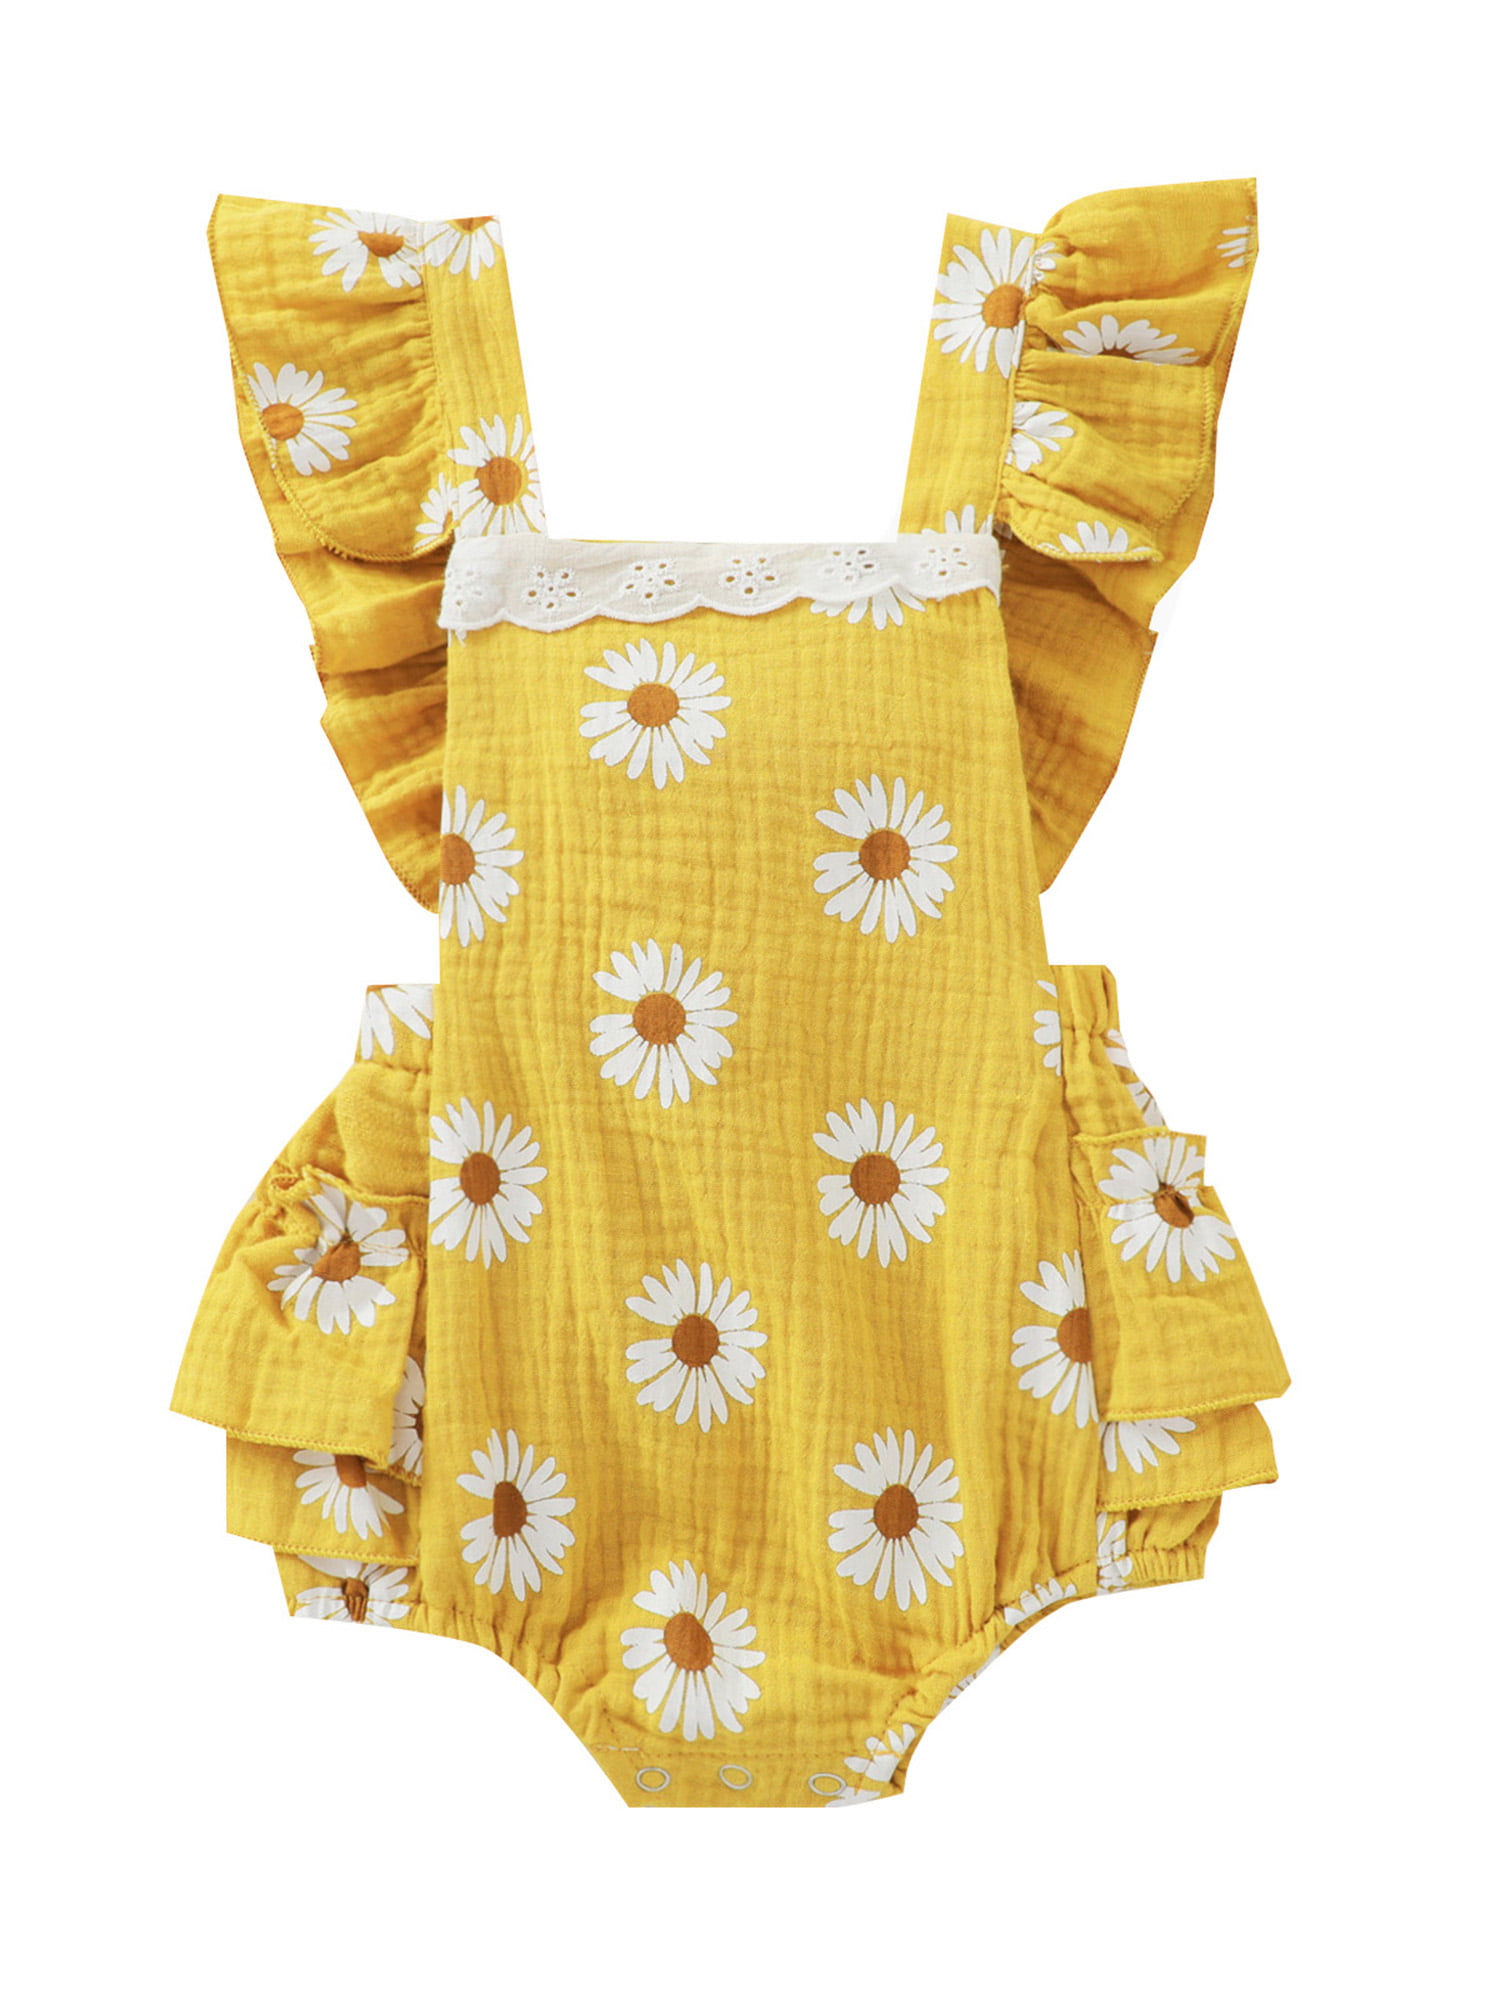 Baby Girls Mustard Yellow Lace Romper Strappy One Piece Jumpsuit Outfit 3m 6m 9m 